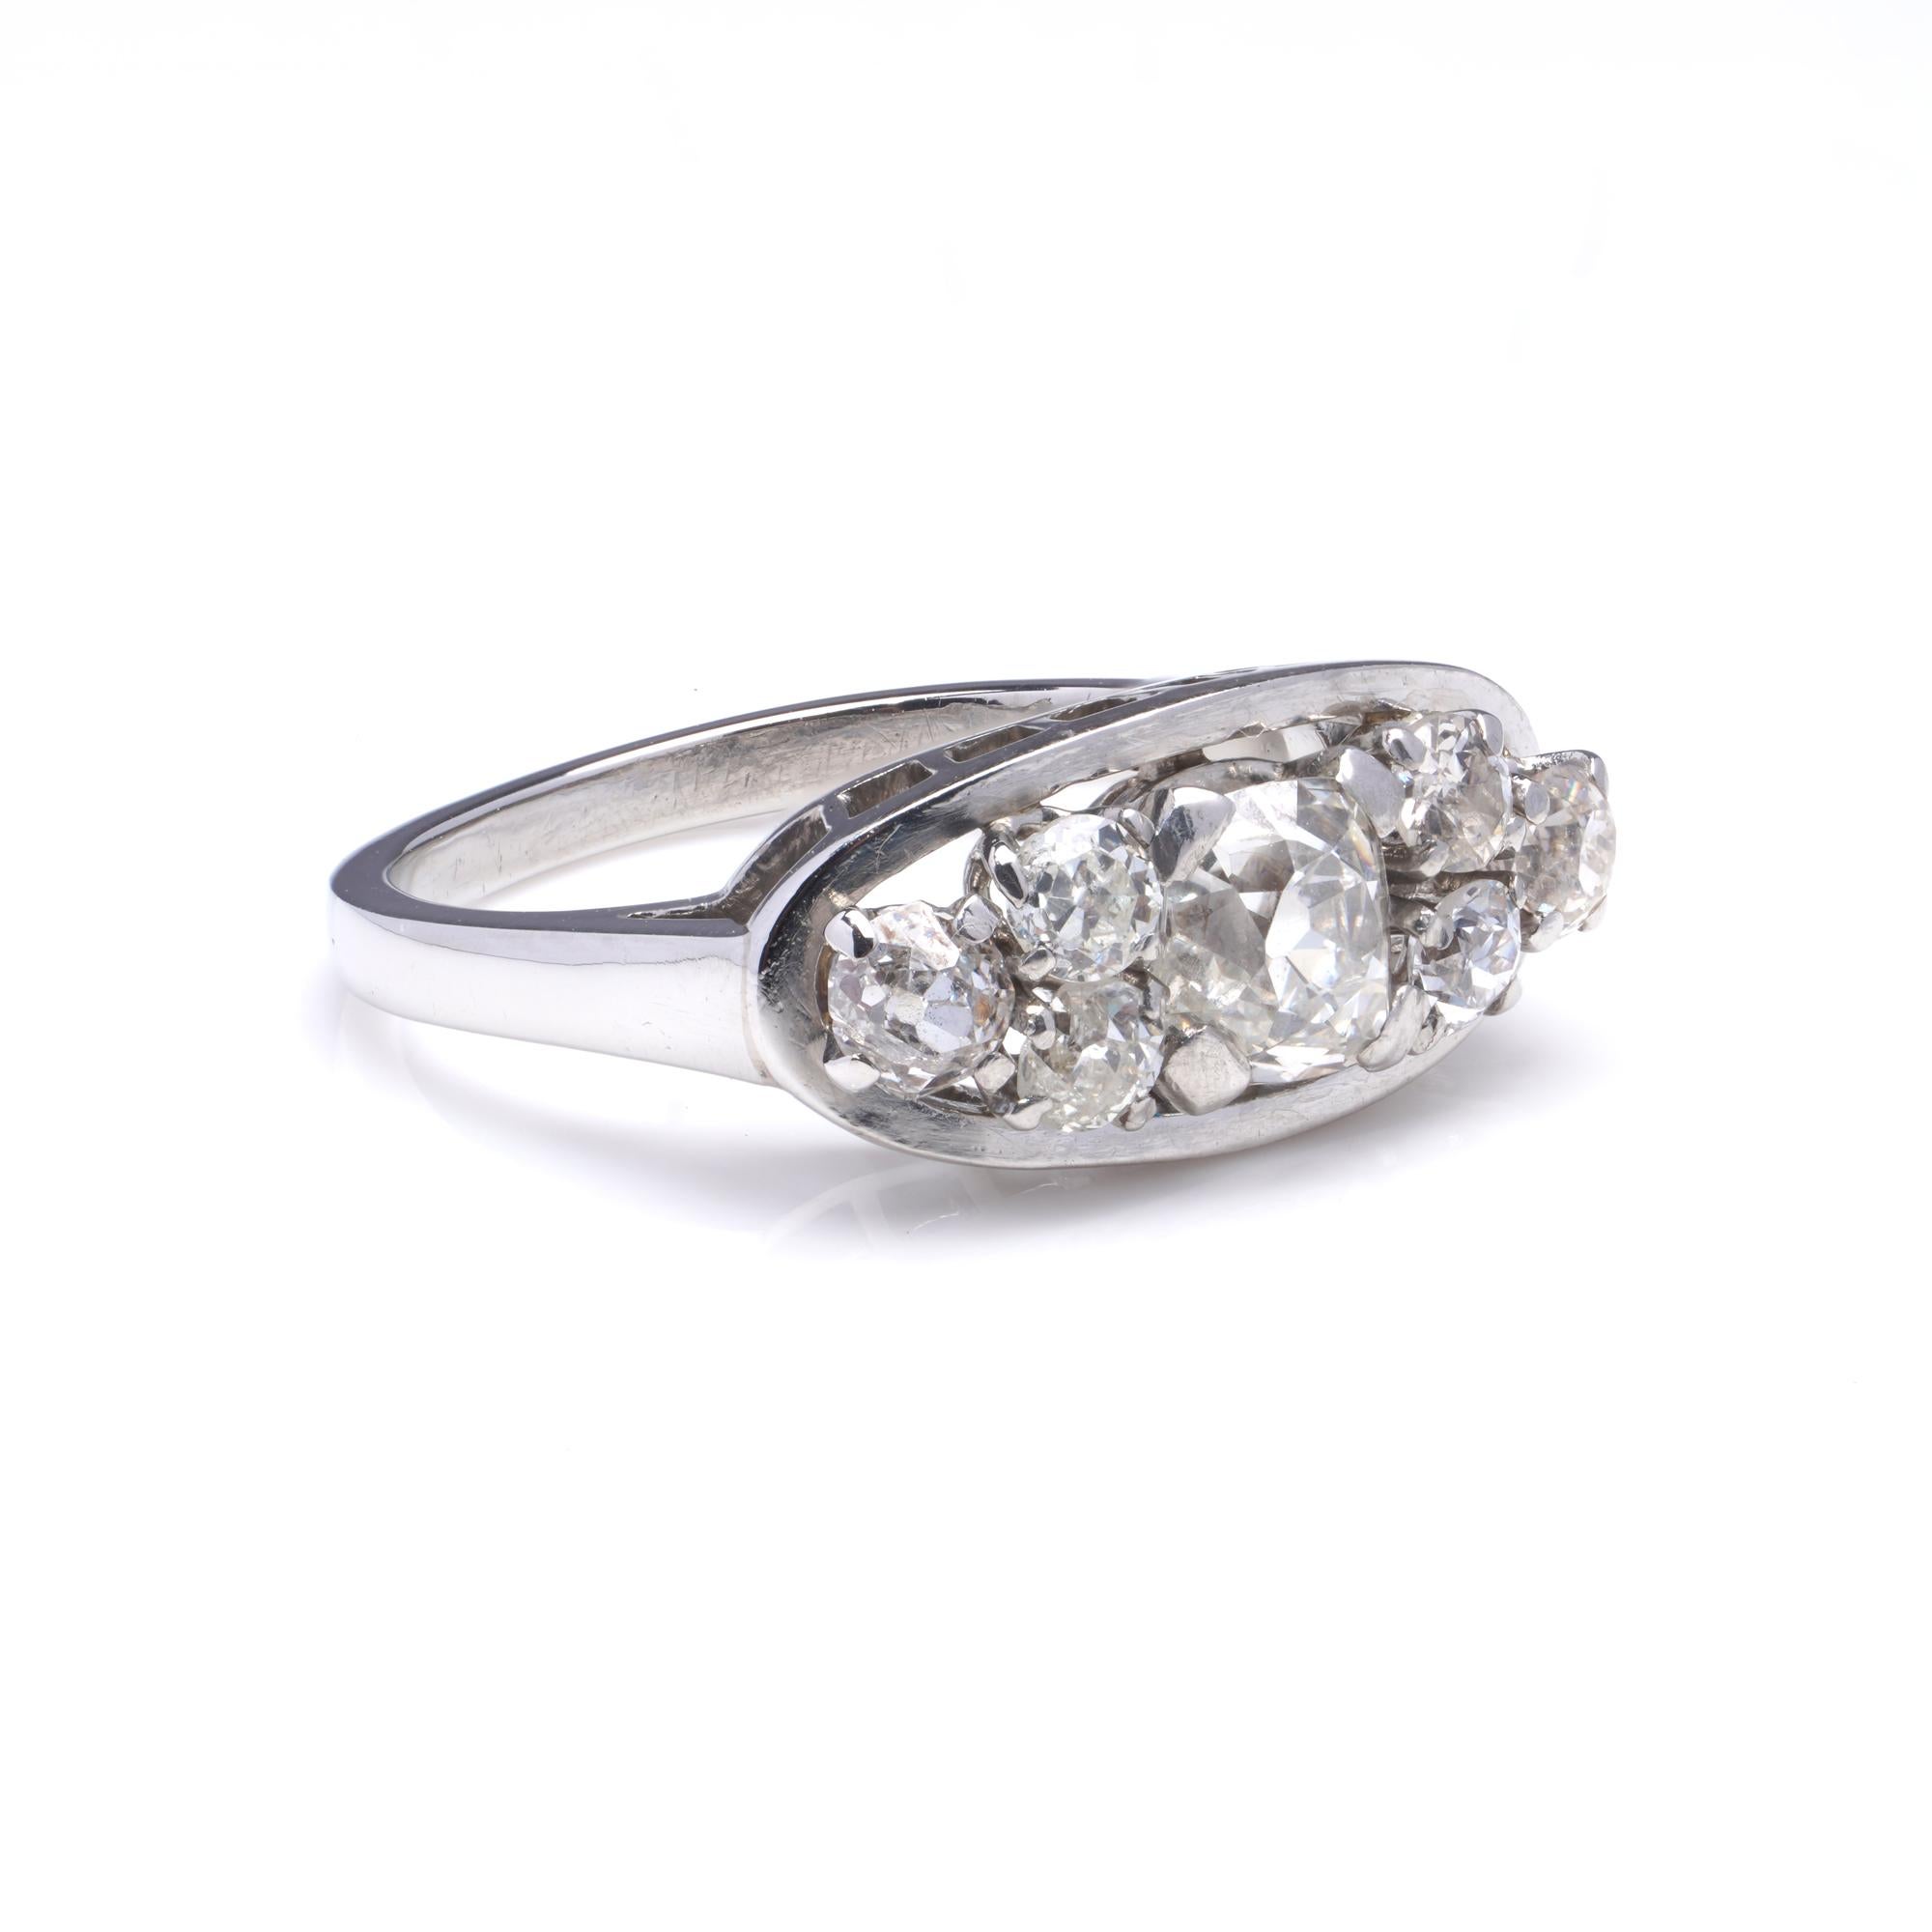 Old Mine Cut Platinum Ladies' Ring Set with 1.76 Carats Old, Mine Cut Diamonds For Sale